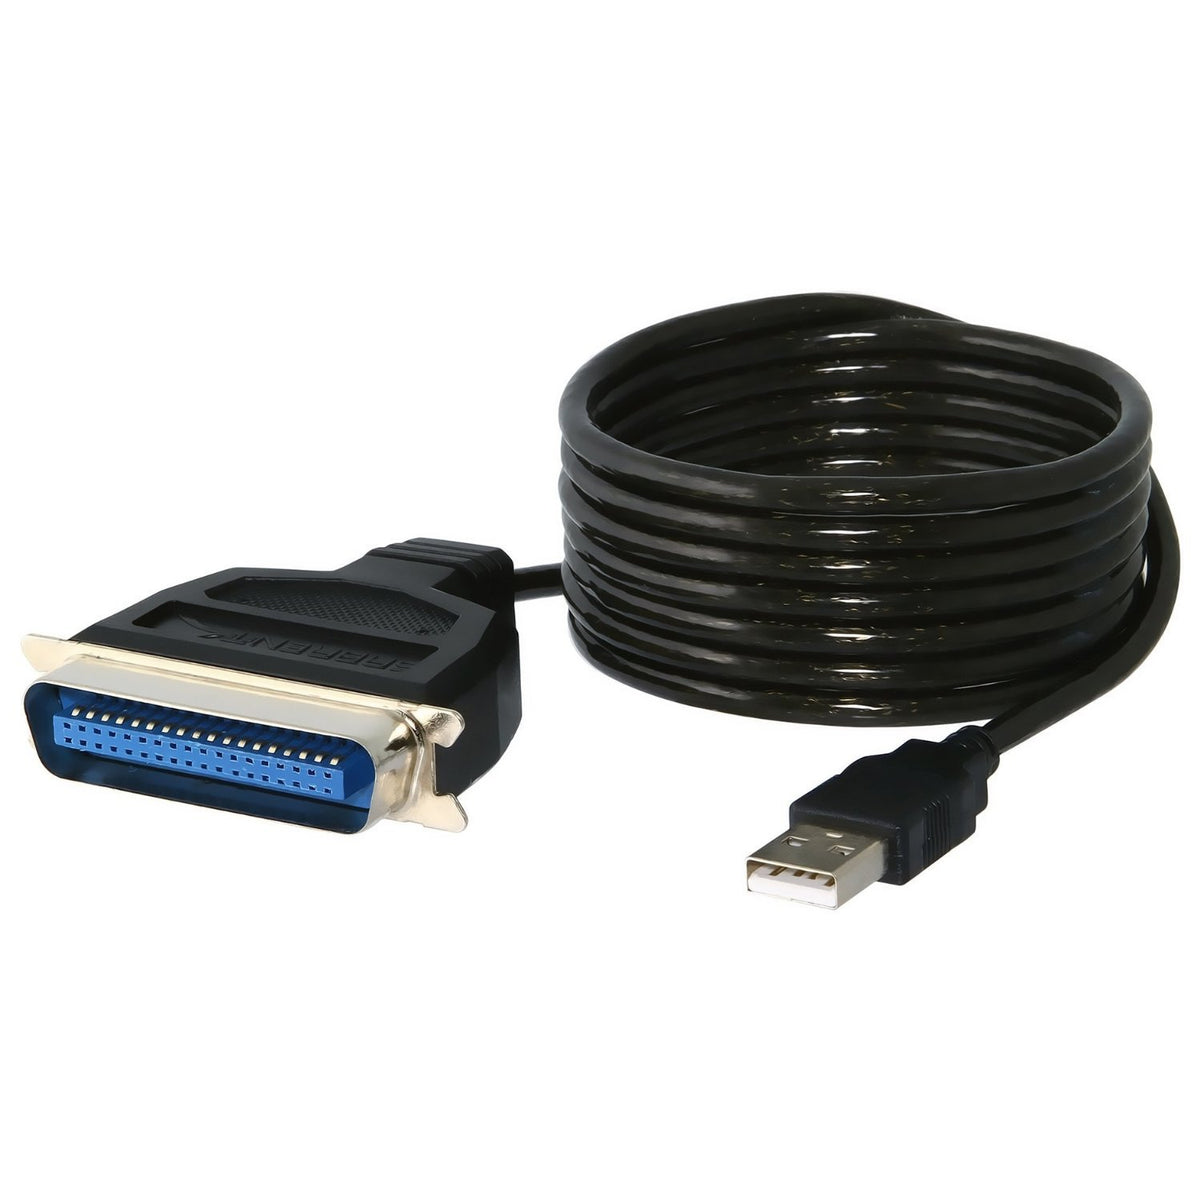 USB to Parallel IEEE 1284 Printer Cable Adapter